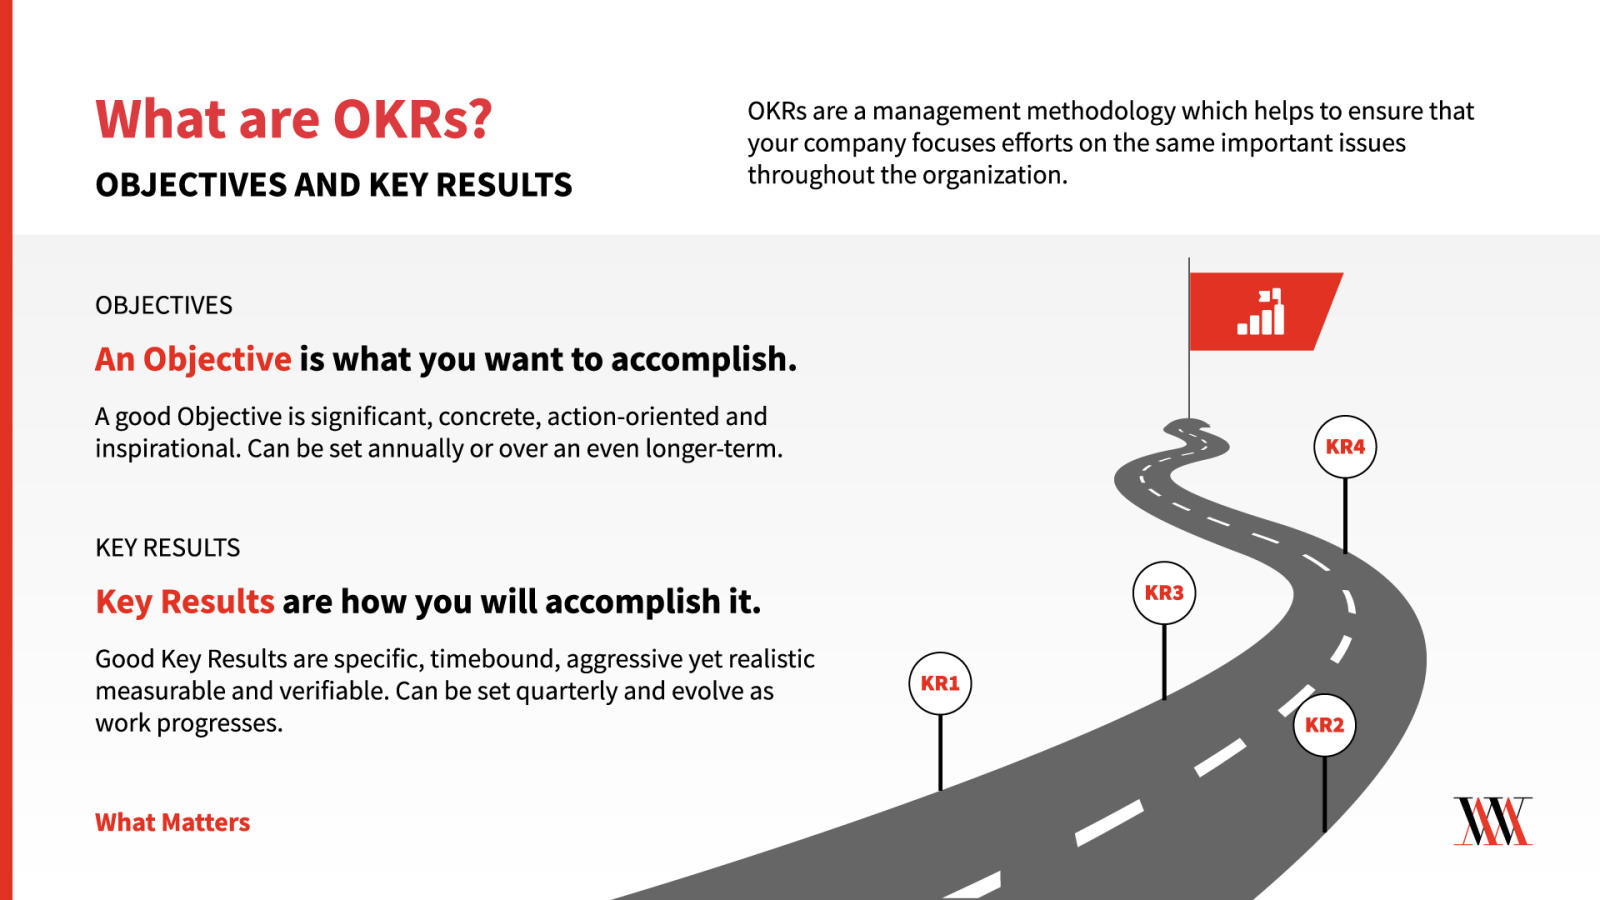 OKR” stands for “objectives and key results.” OKRs are an effective goal-setting and leadership tool for communicating what you want to accomplish and what milestones you’ll need to meet in order to accomplish it. OKRs are used by some of the world’s leading organizations to set and enact their strategies.